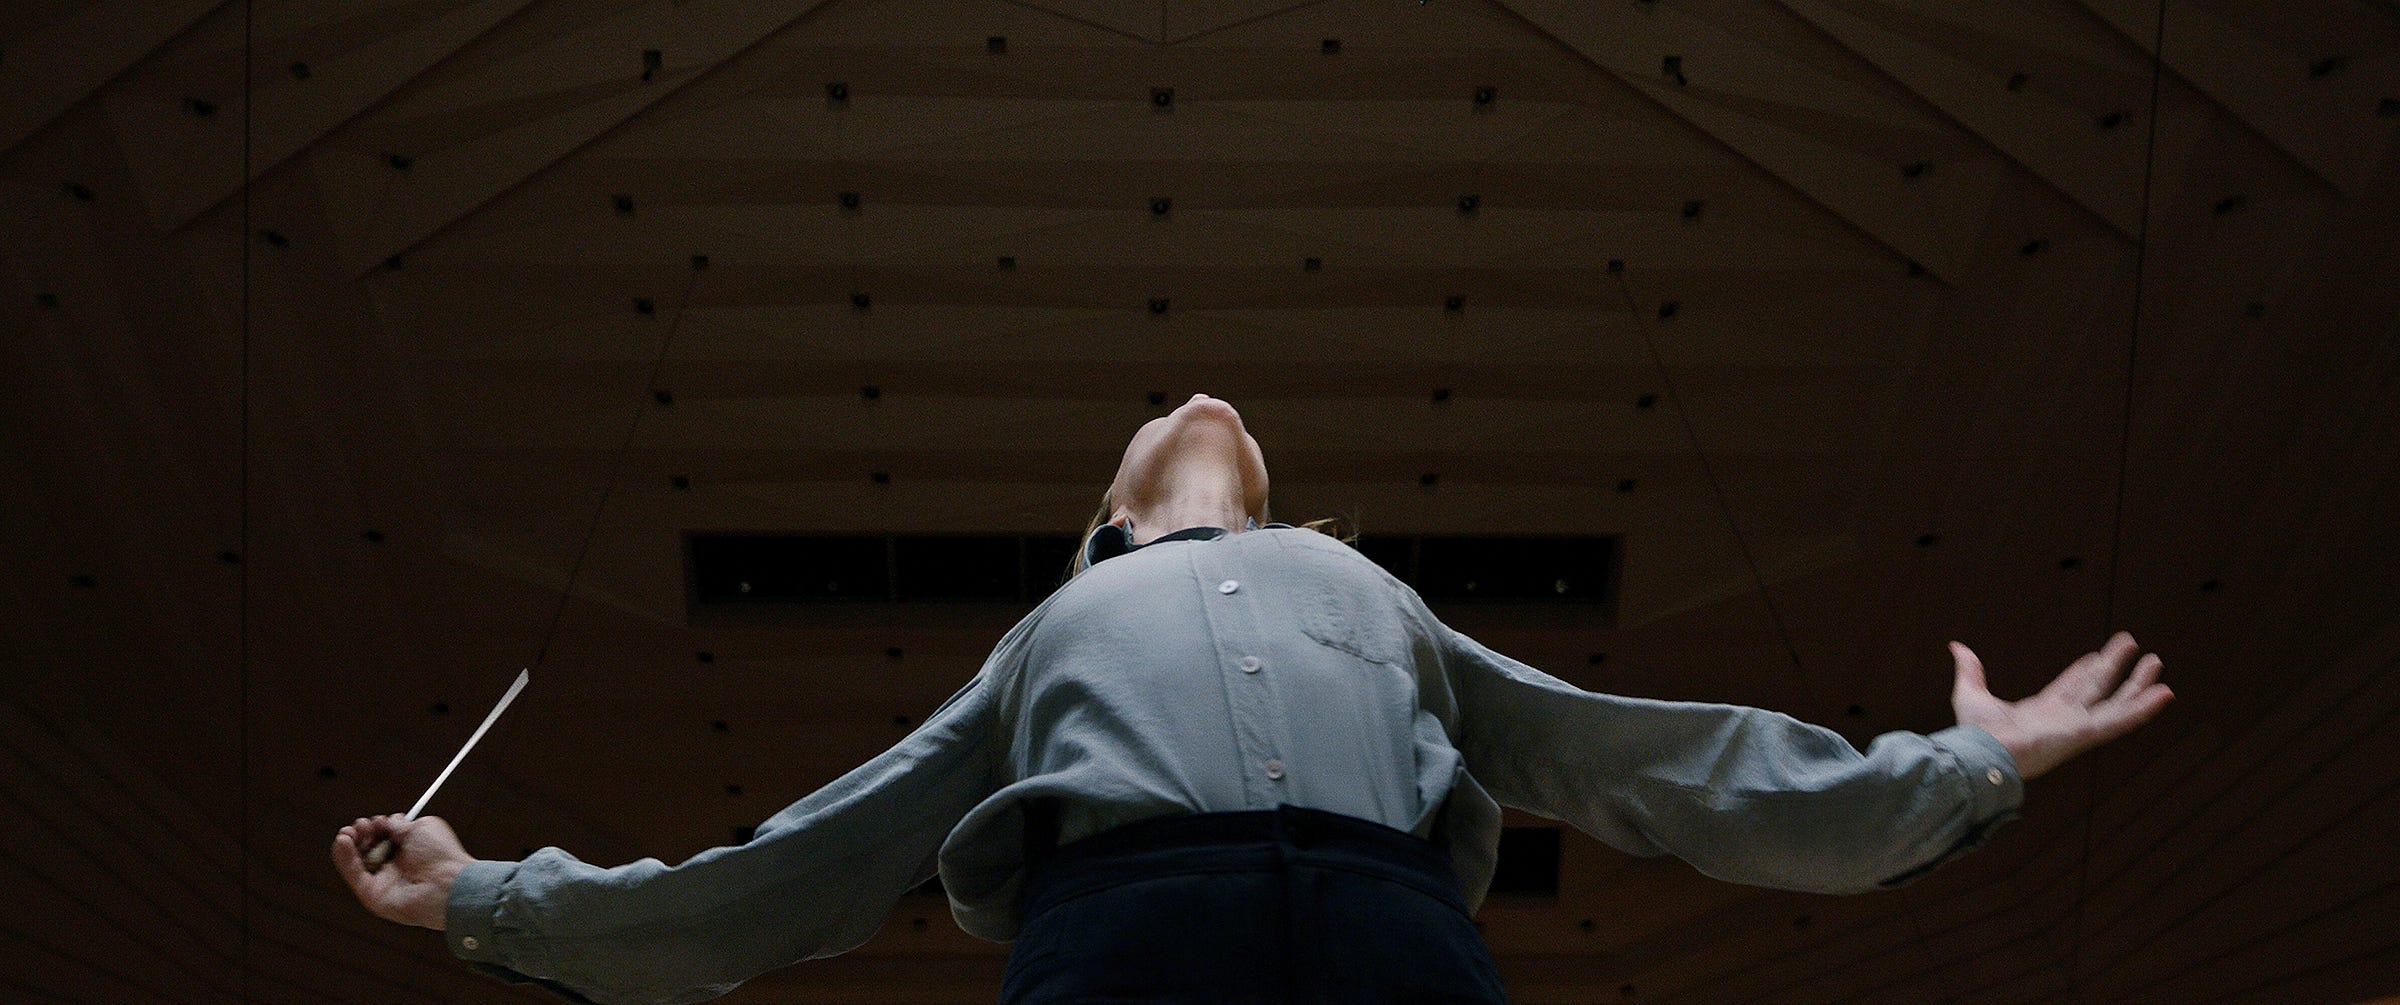 Cate Blanchett as Lydia Tár wields her conducting baton with gusto, leaning backwards as she conducts her orchestra. Her face is hidden by the lower angle of the photo.